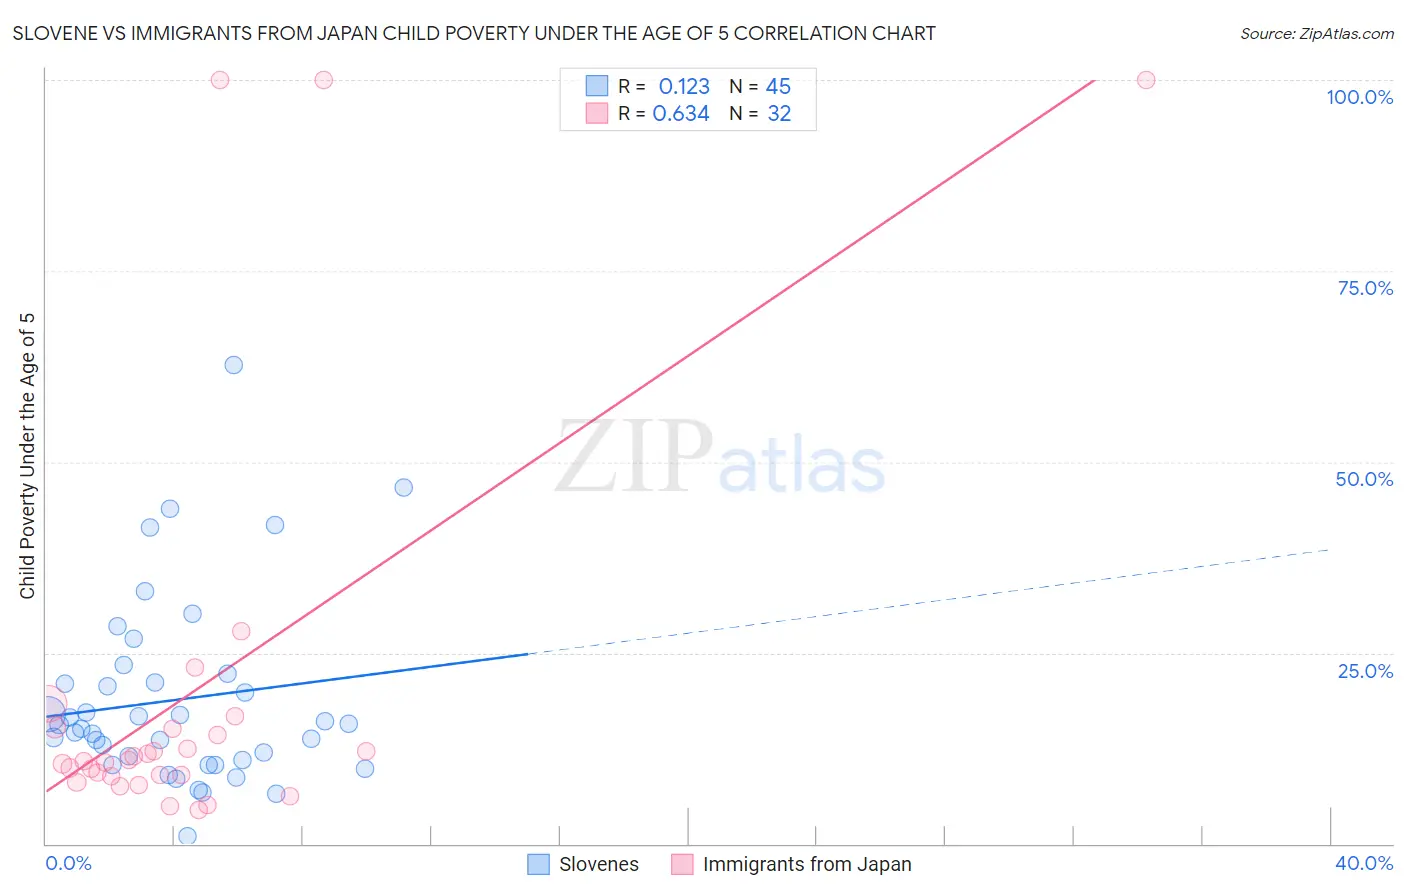 Slovene vs Immigrants from Japan Child Poverty Under the Age of 5